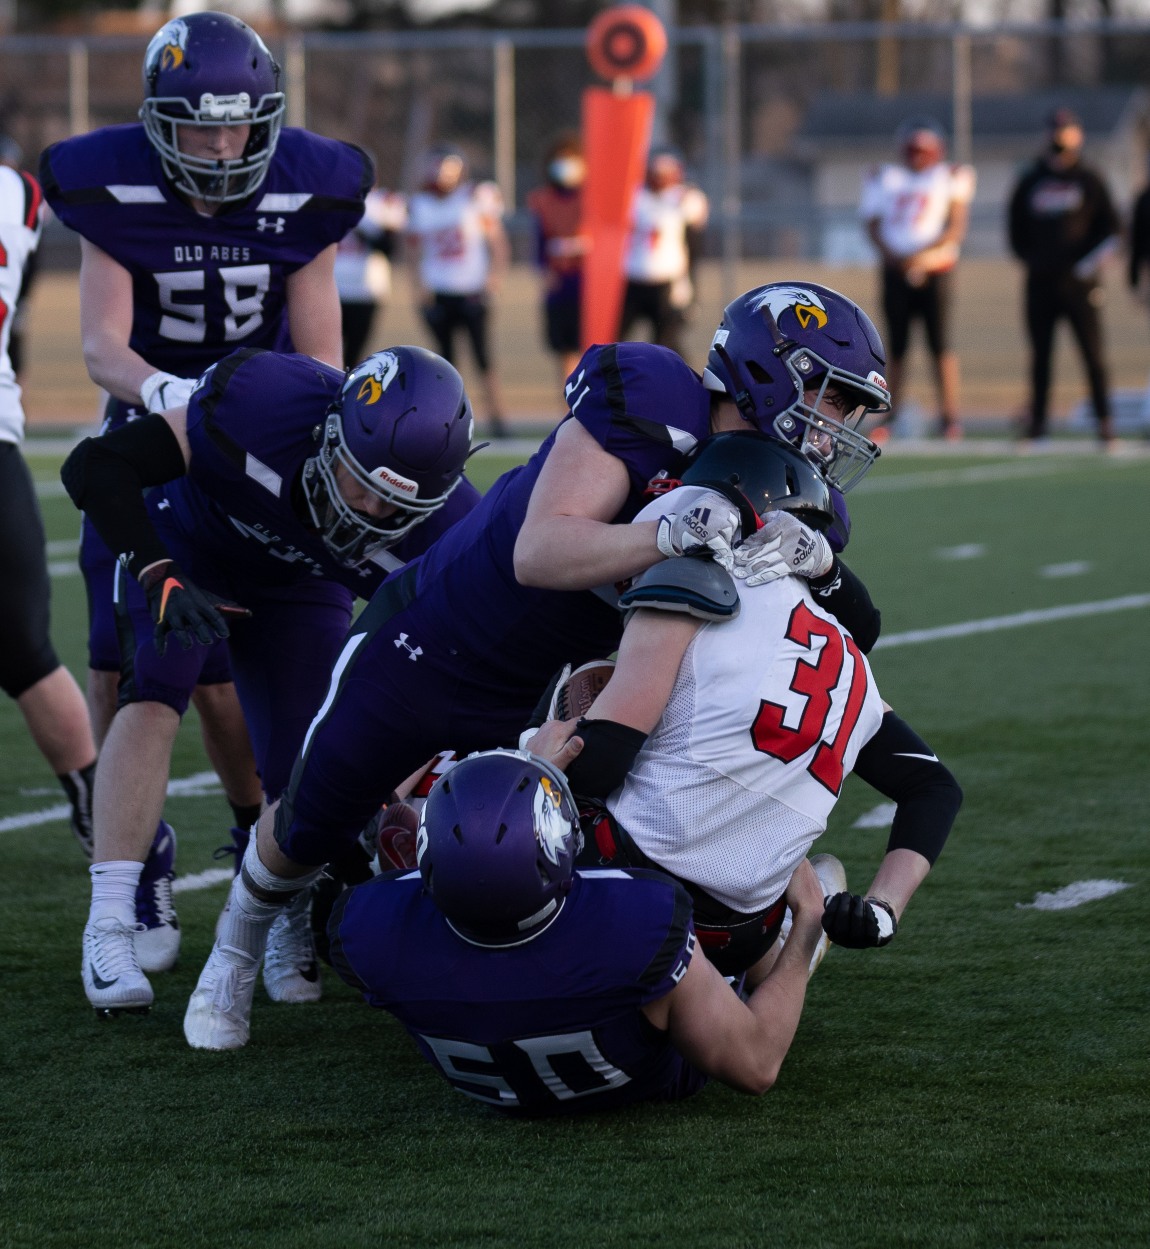 Eau-Claire-Memorial-JV-Football-LaCrosse-Central-at-Home-3-29-21-1372